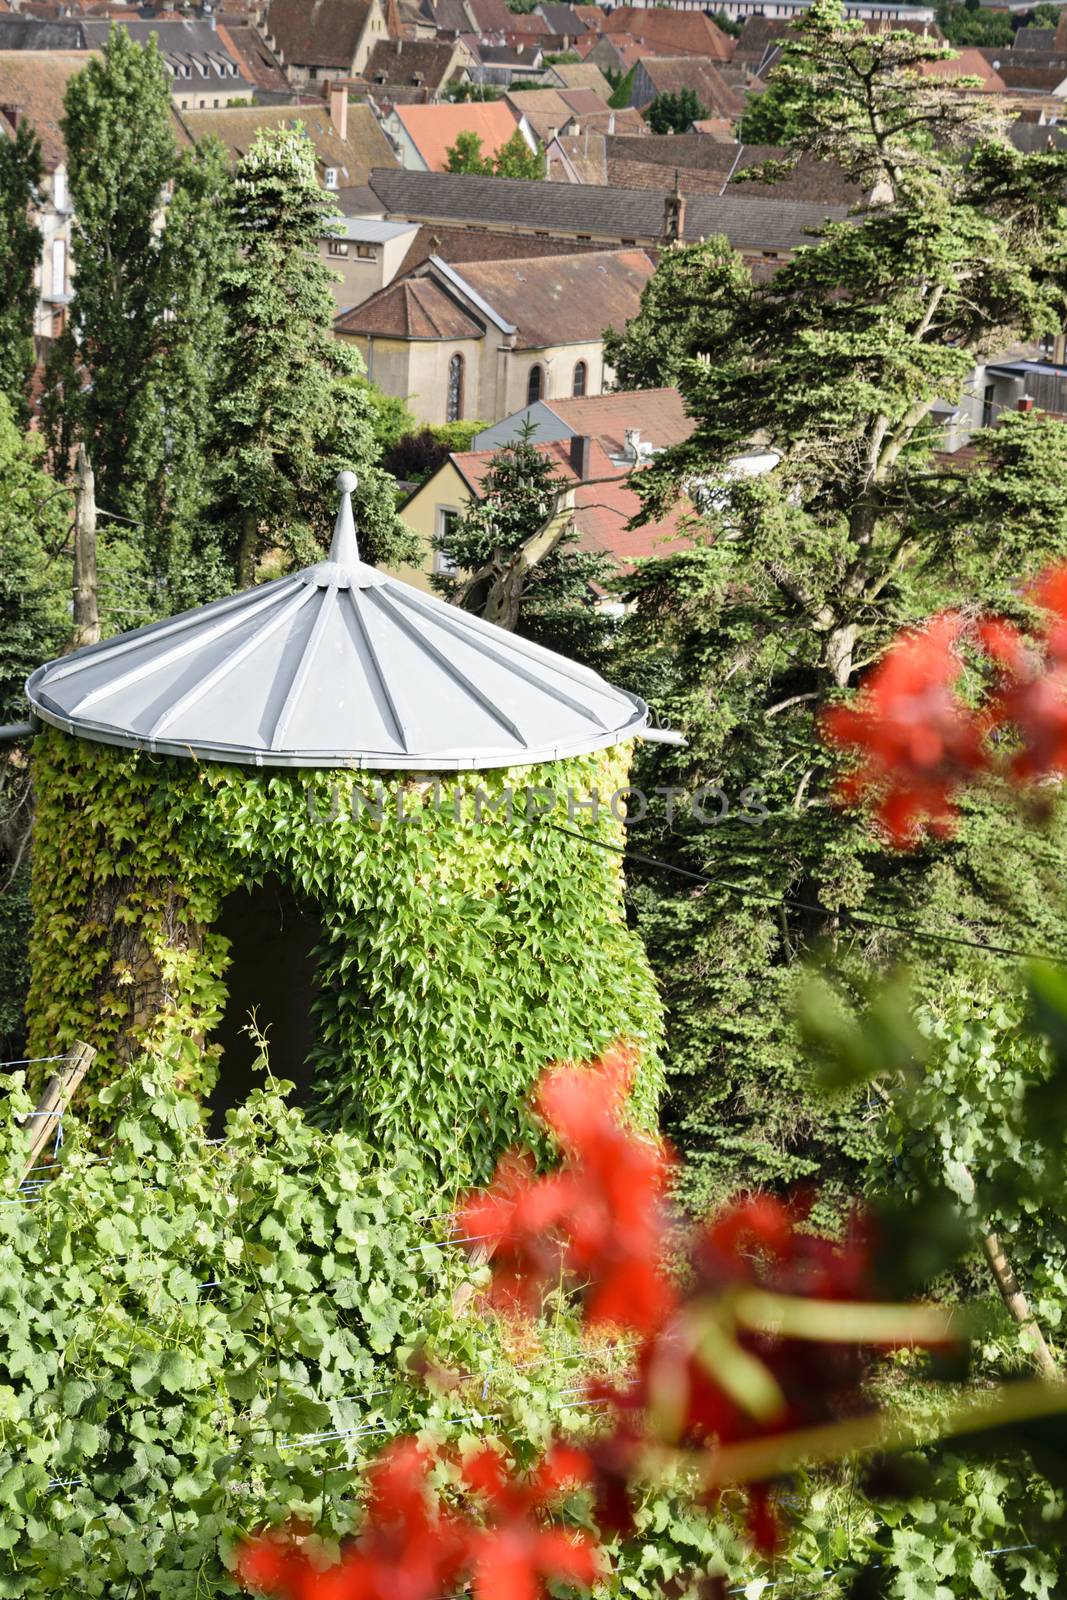 France, Alsace, June 2015: Vine covered turret leading from chateau to the medieval French village below